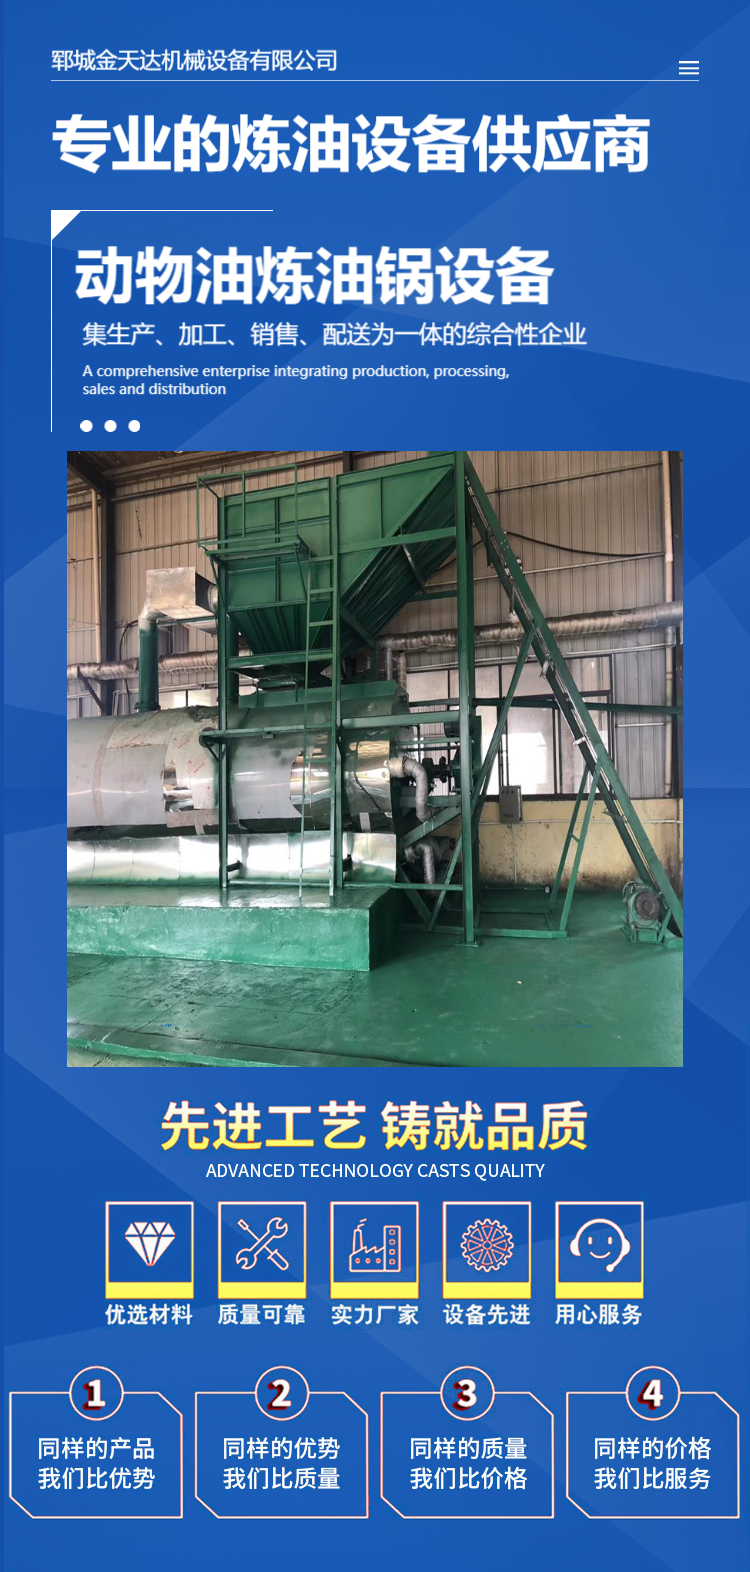 Jintianda 8 ton biological particle oil boiling pot boiler plate material - fast delivery